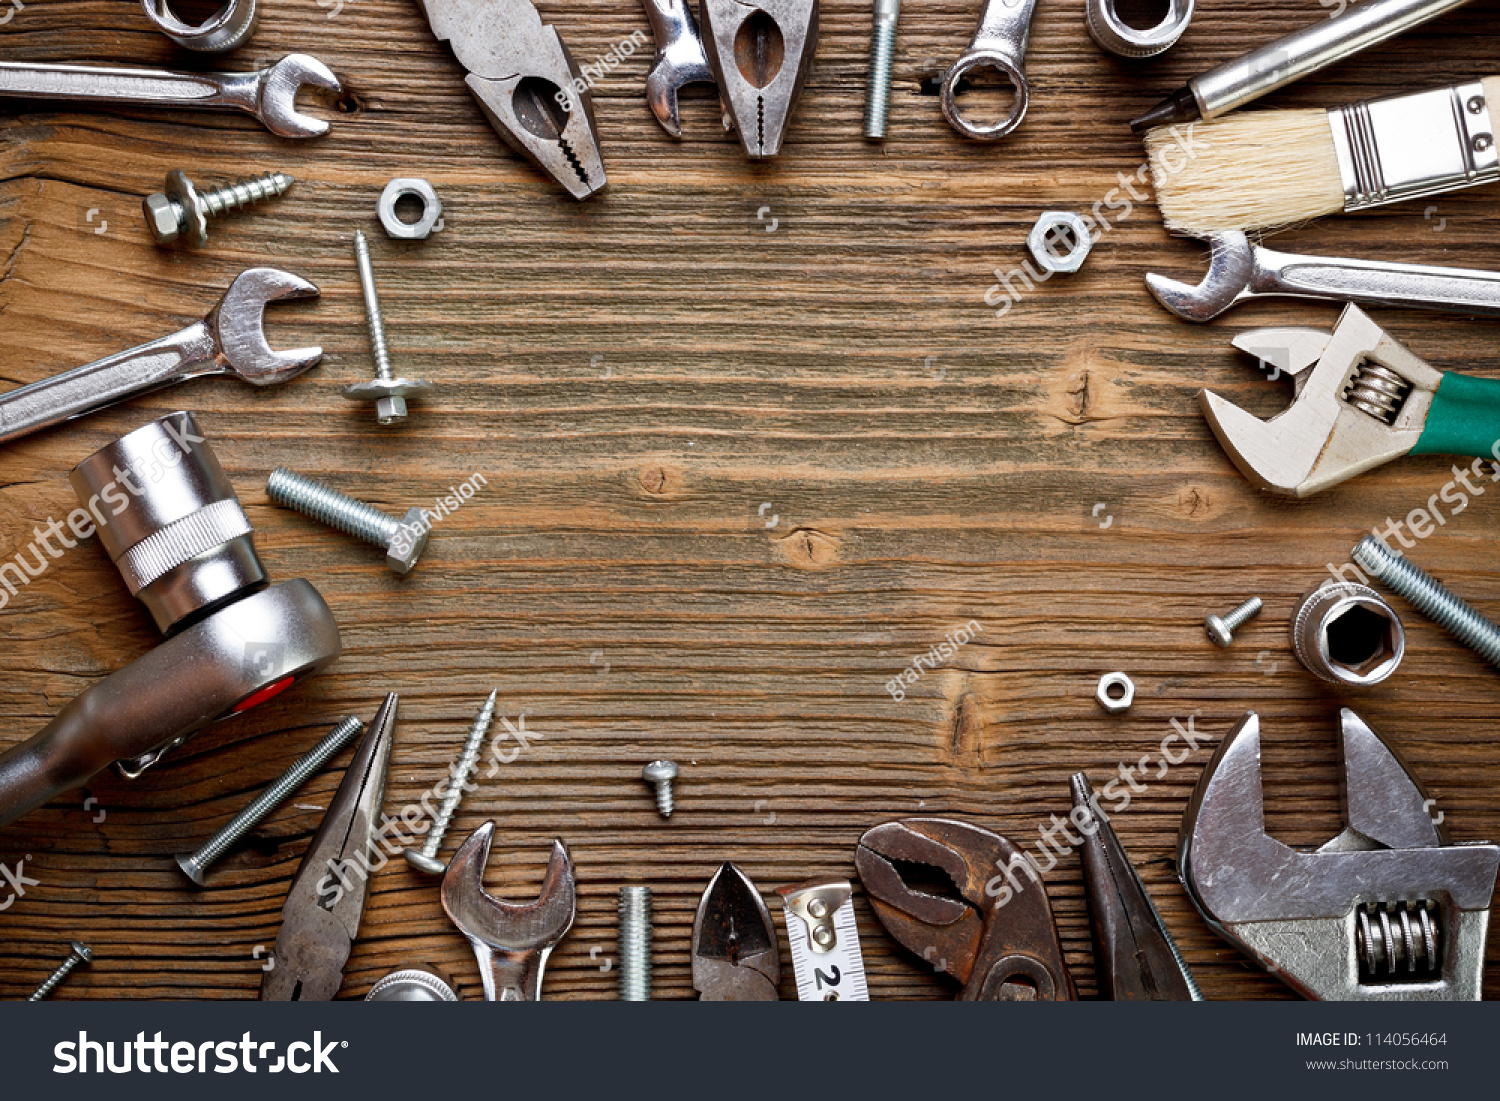 Group of used tools on wood background #114056464